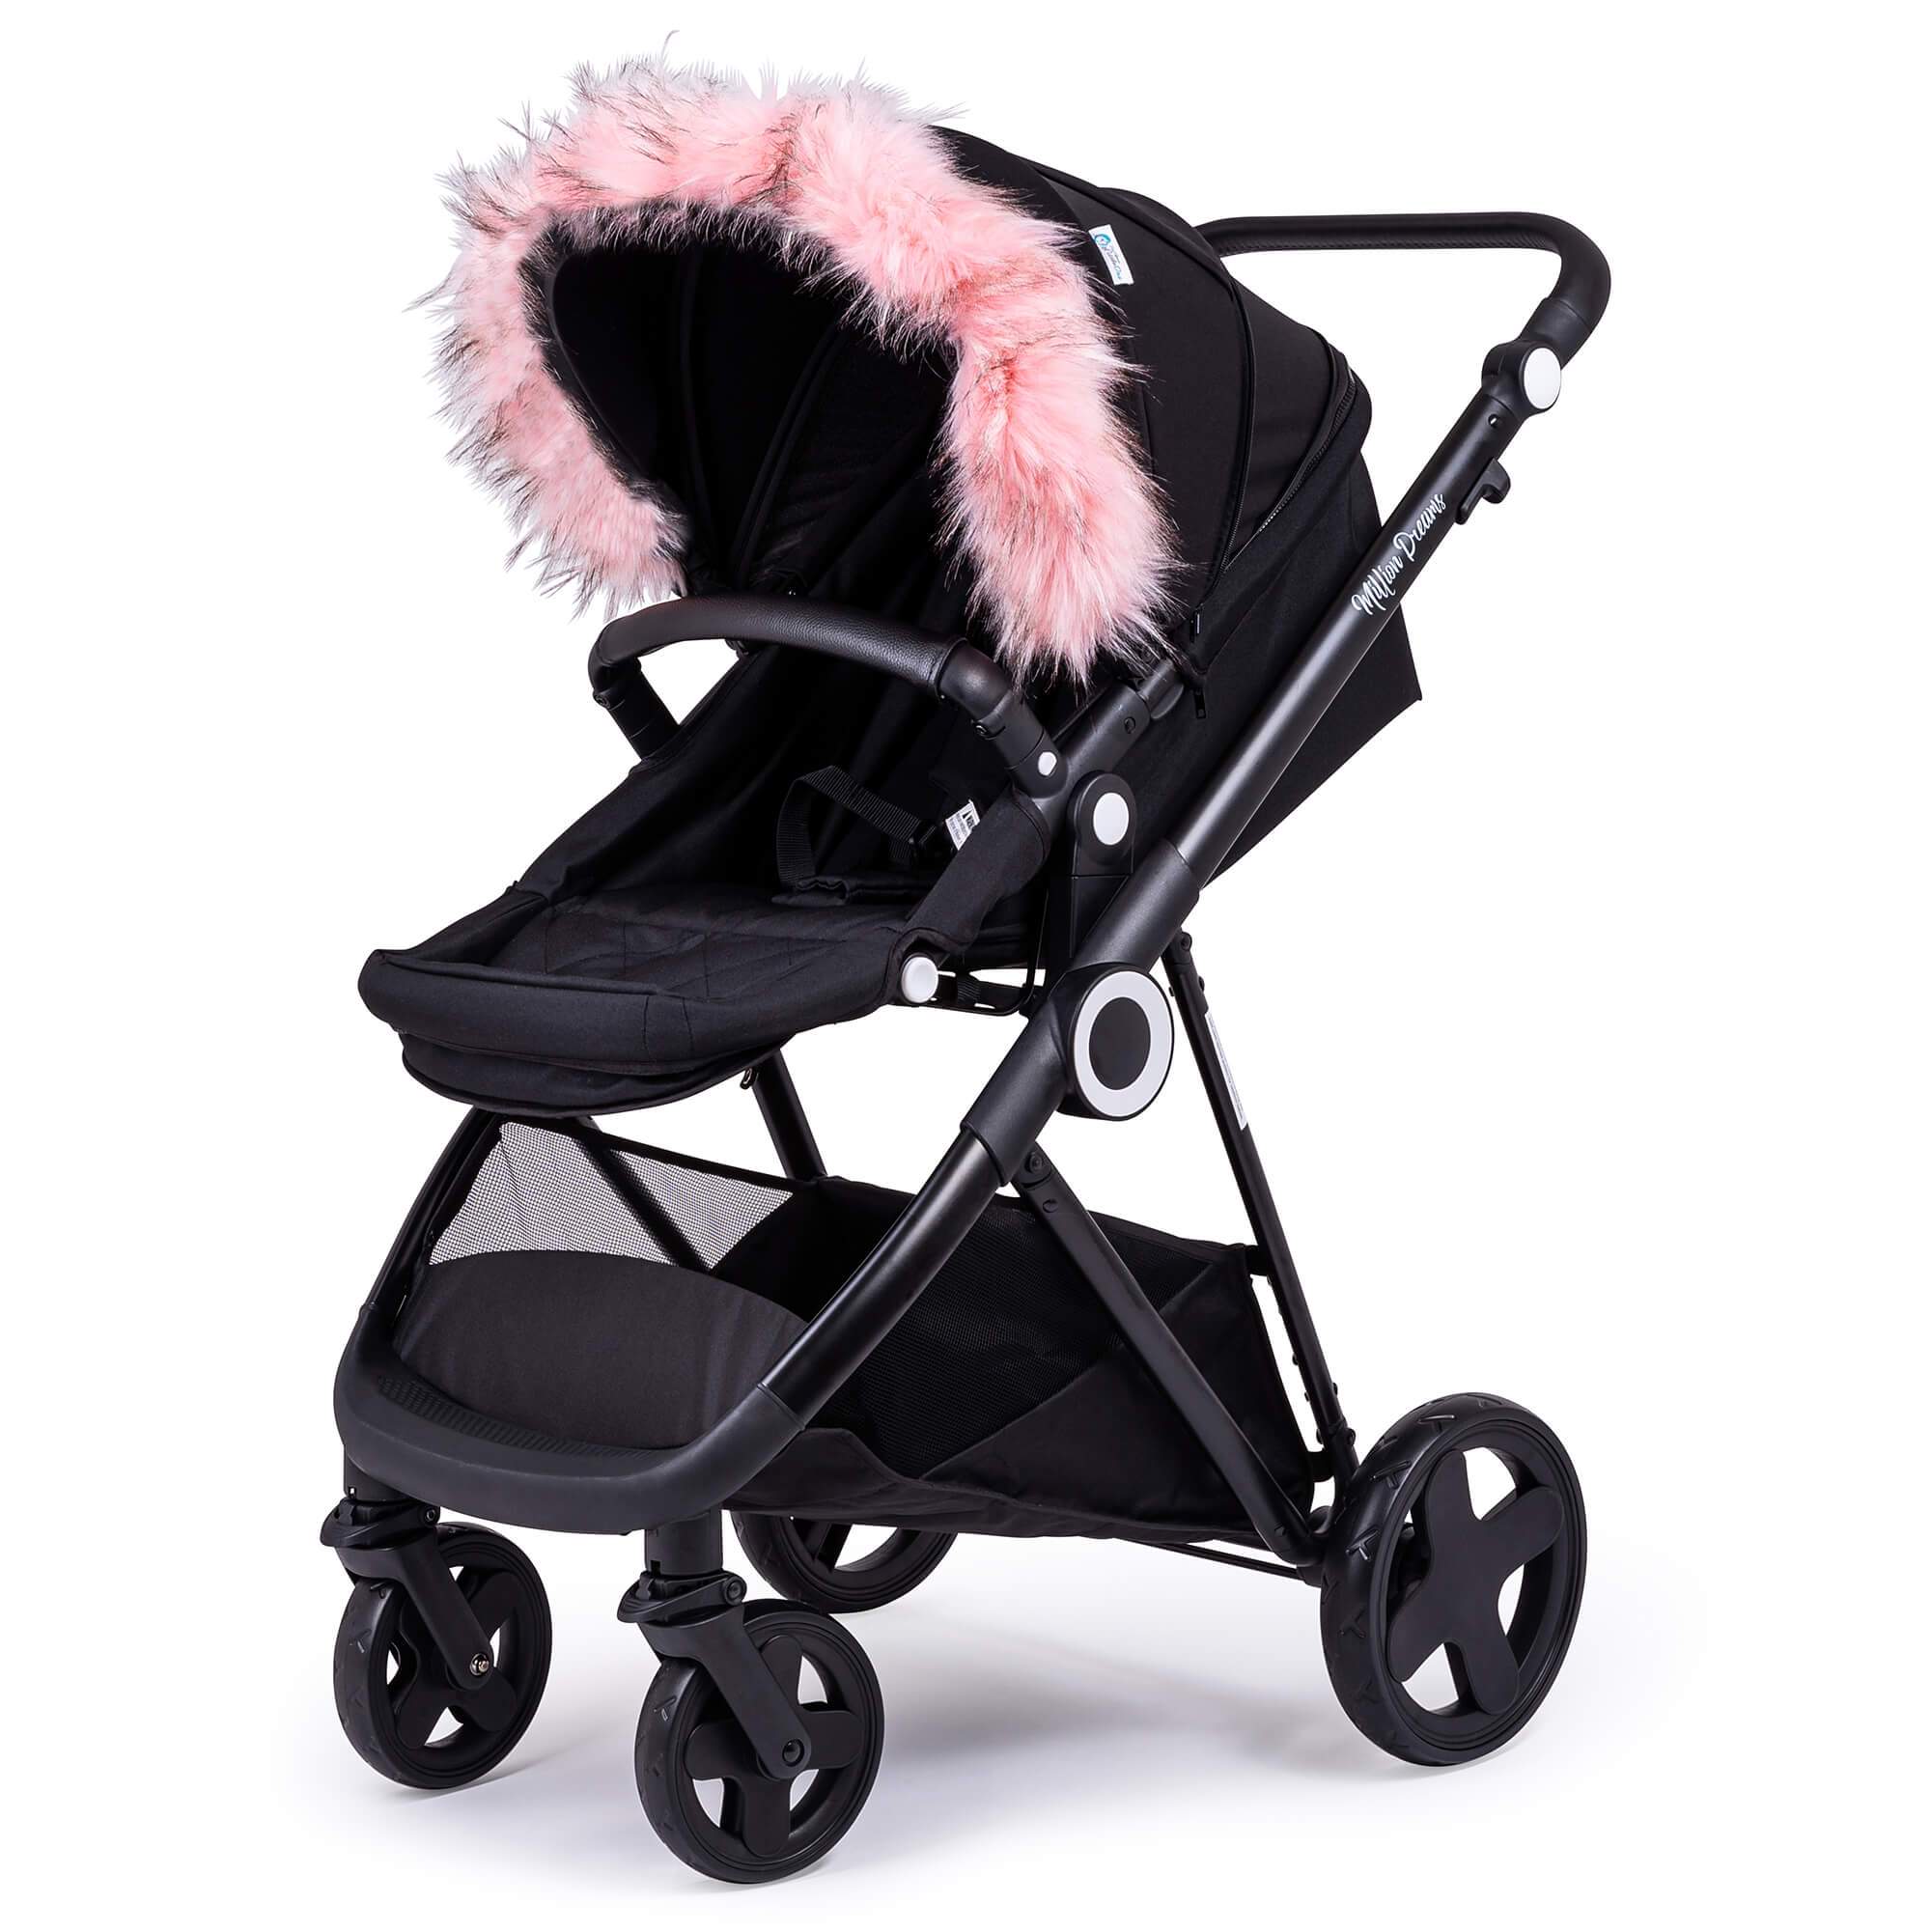 Pram Fur Hood Trim Attachment For Pushchair Compatible with Kinderkraft - Light Pink / Fits All Models | For Your Little One